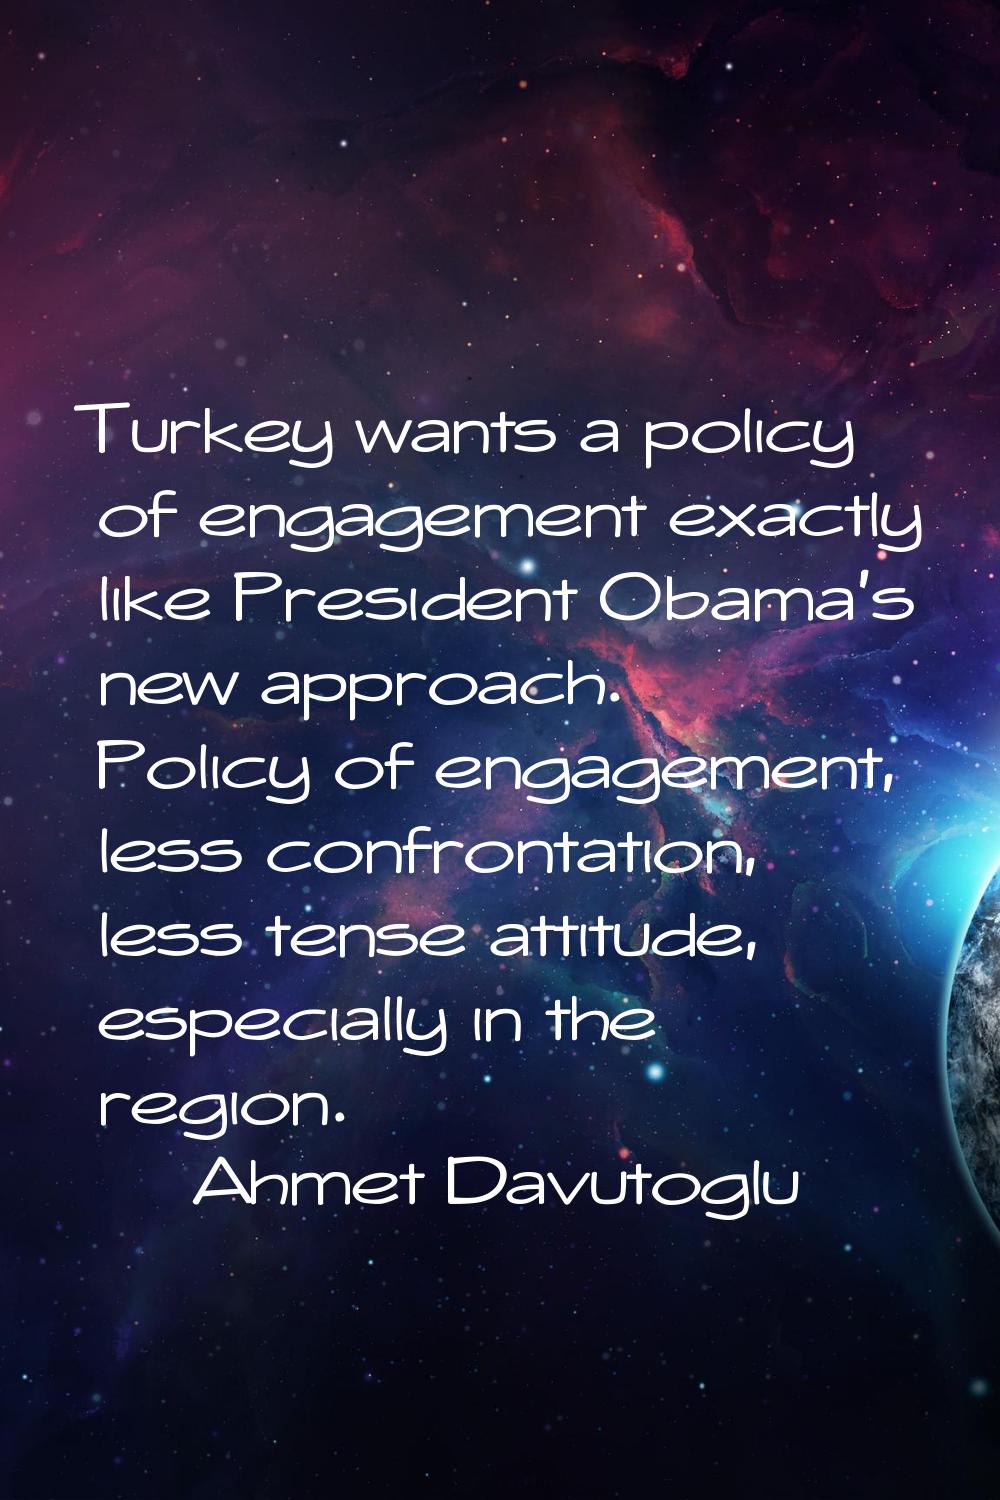 Turkey wants a policy of engagement exactly like President Obama's new approach. Policy of engageme